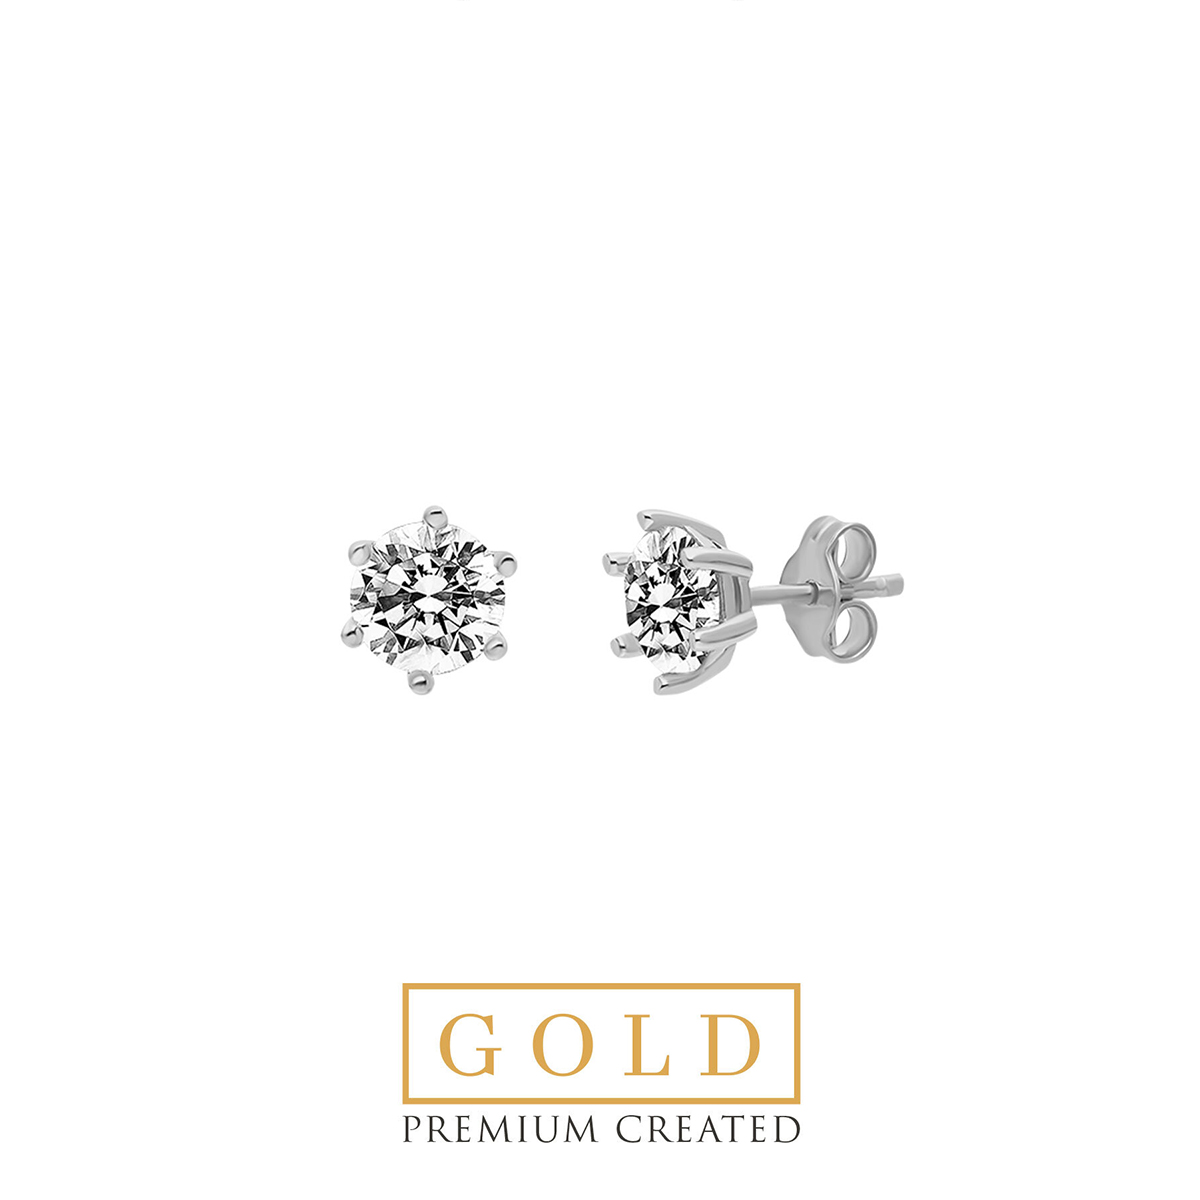 Premium Created Special Cut Stone 14K White Gold Earrings